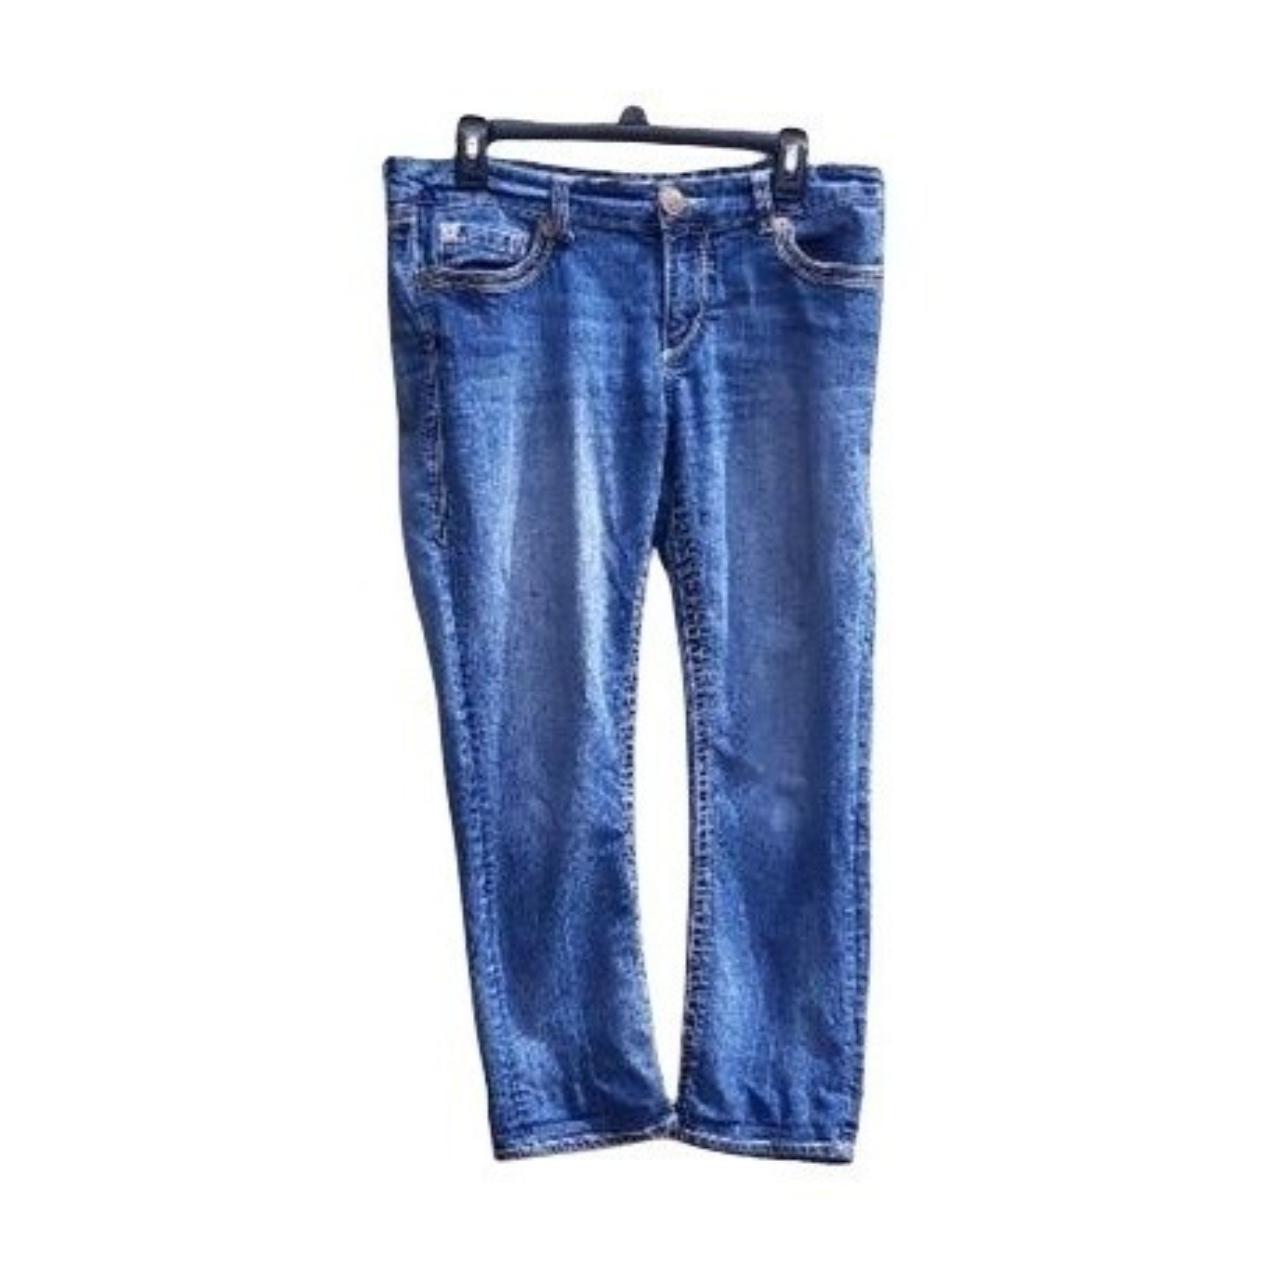 Women's Size 8 jeans at Seven7 Jeans